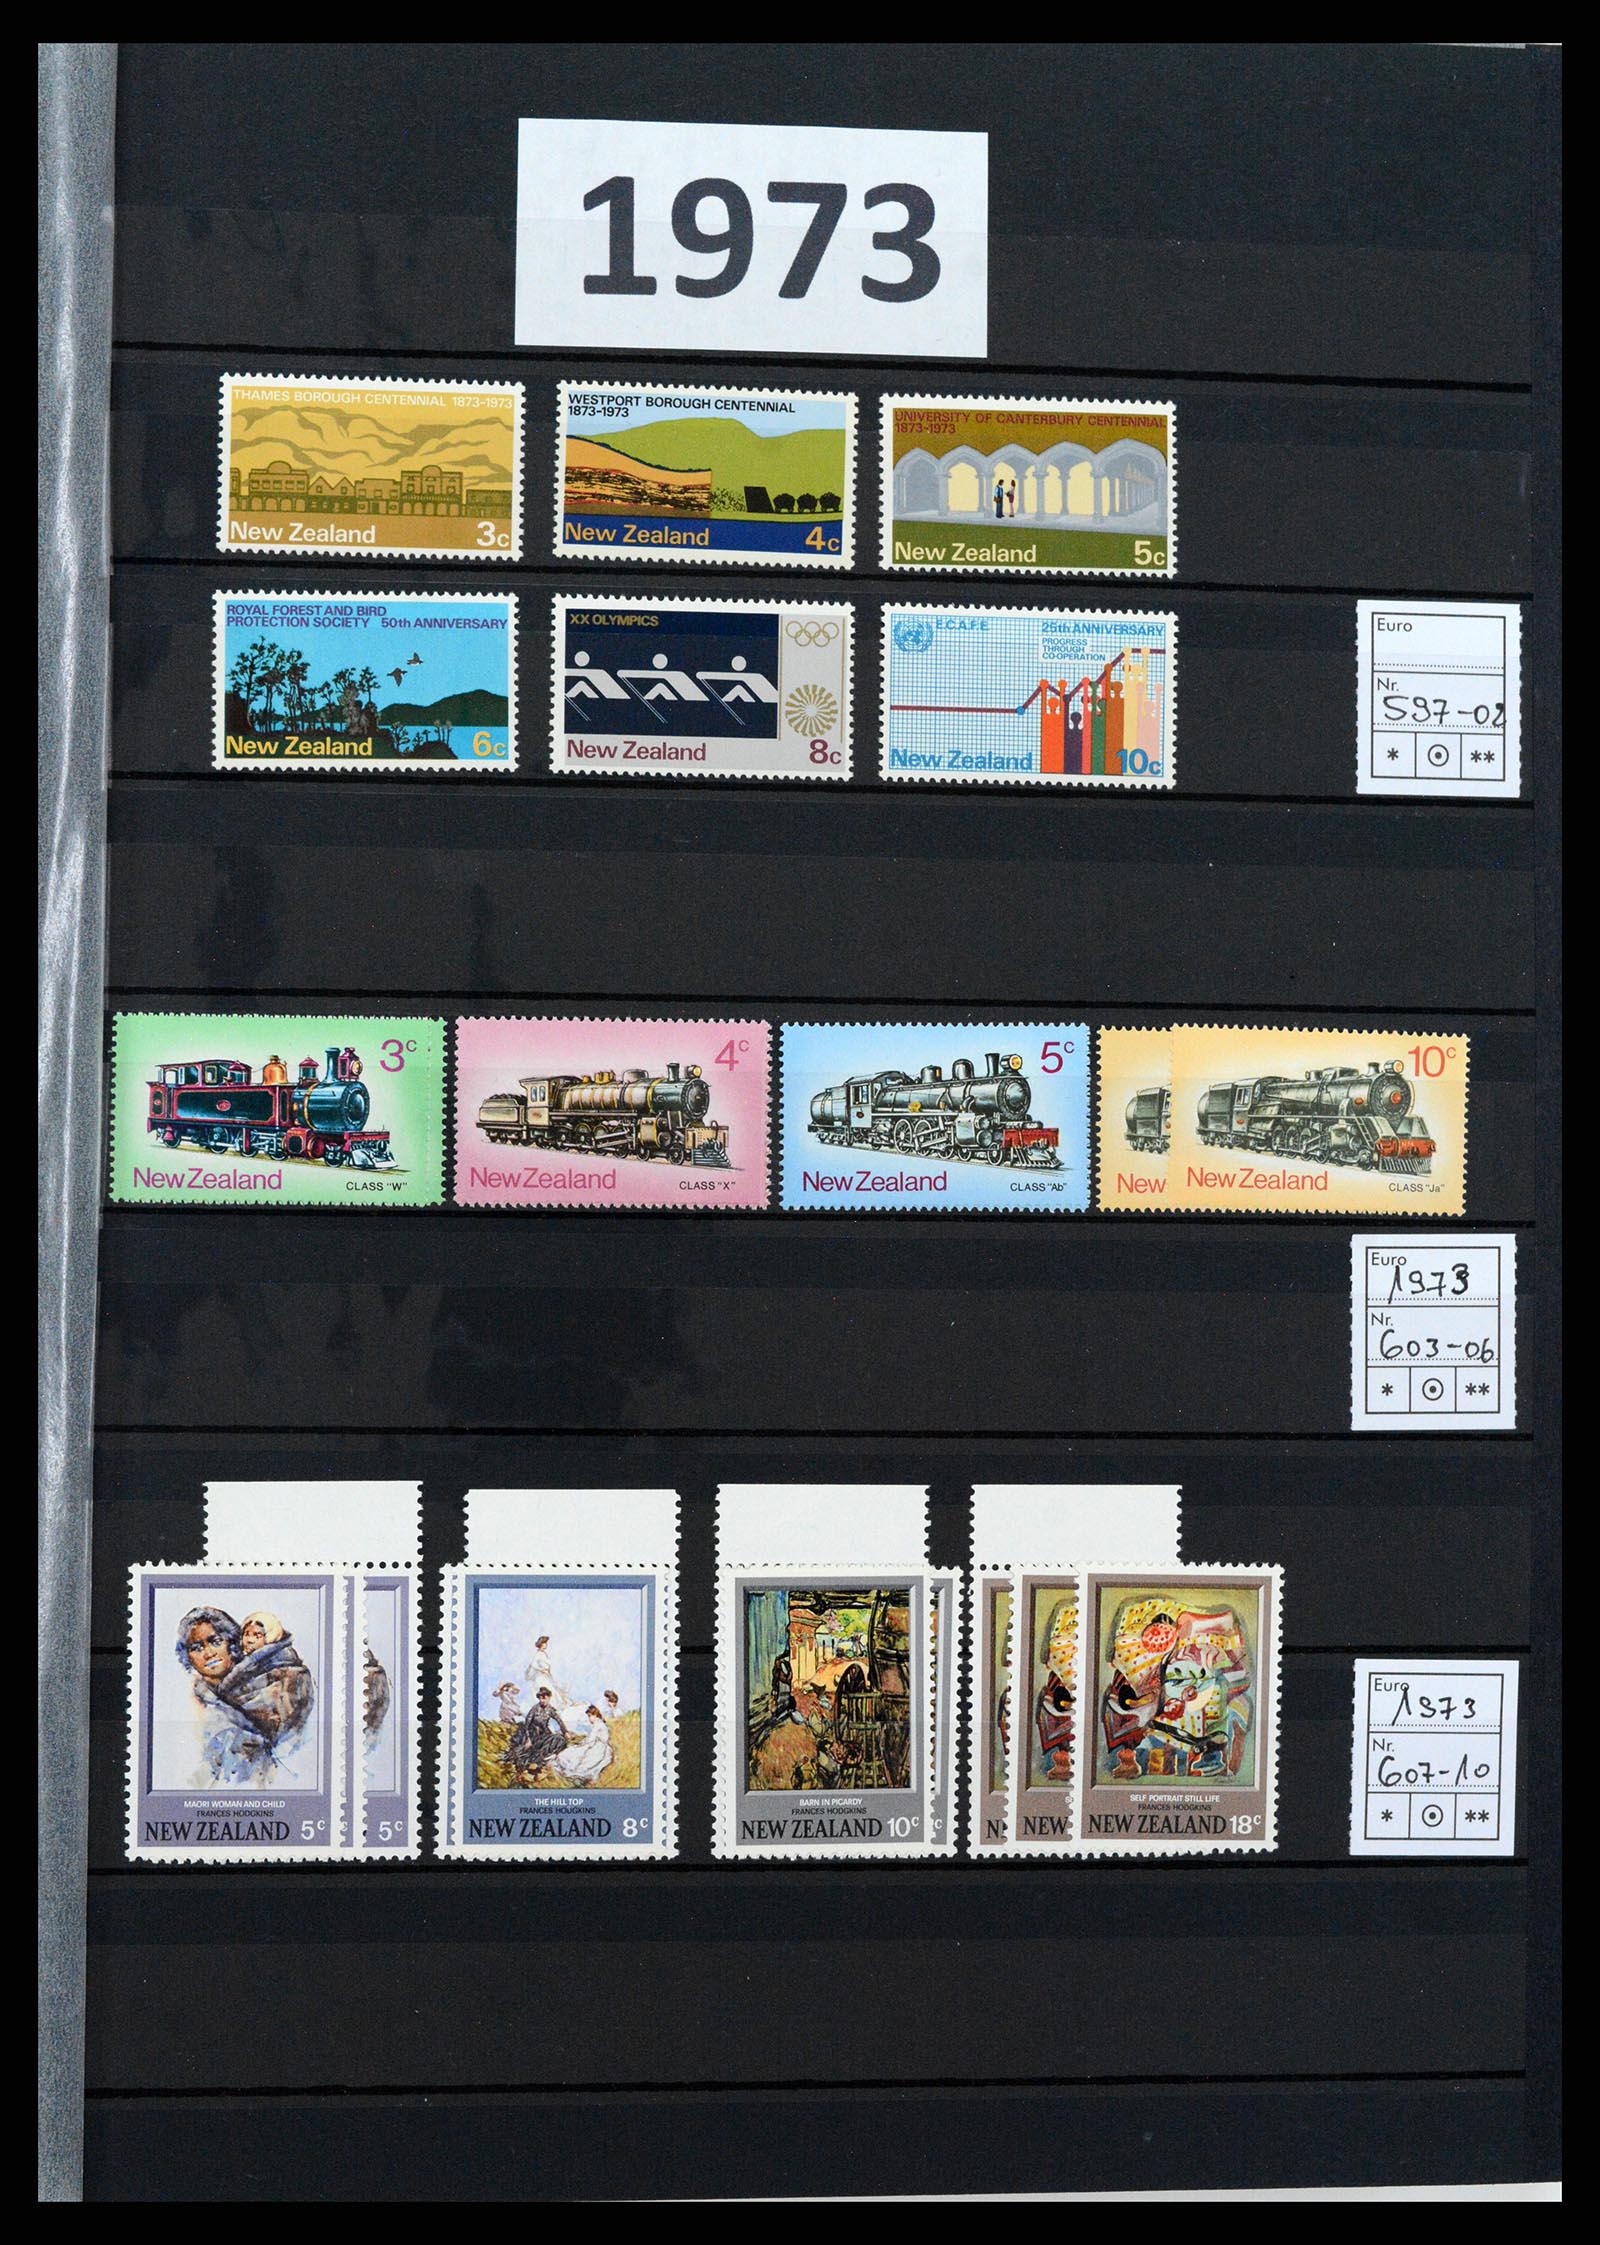 37597 011 - Stamp collection 37597 New Zealand 1970-2012.